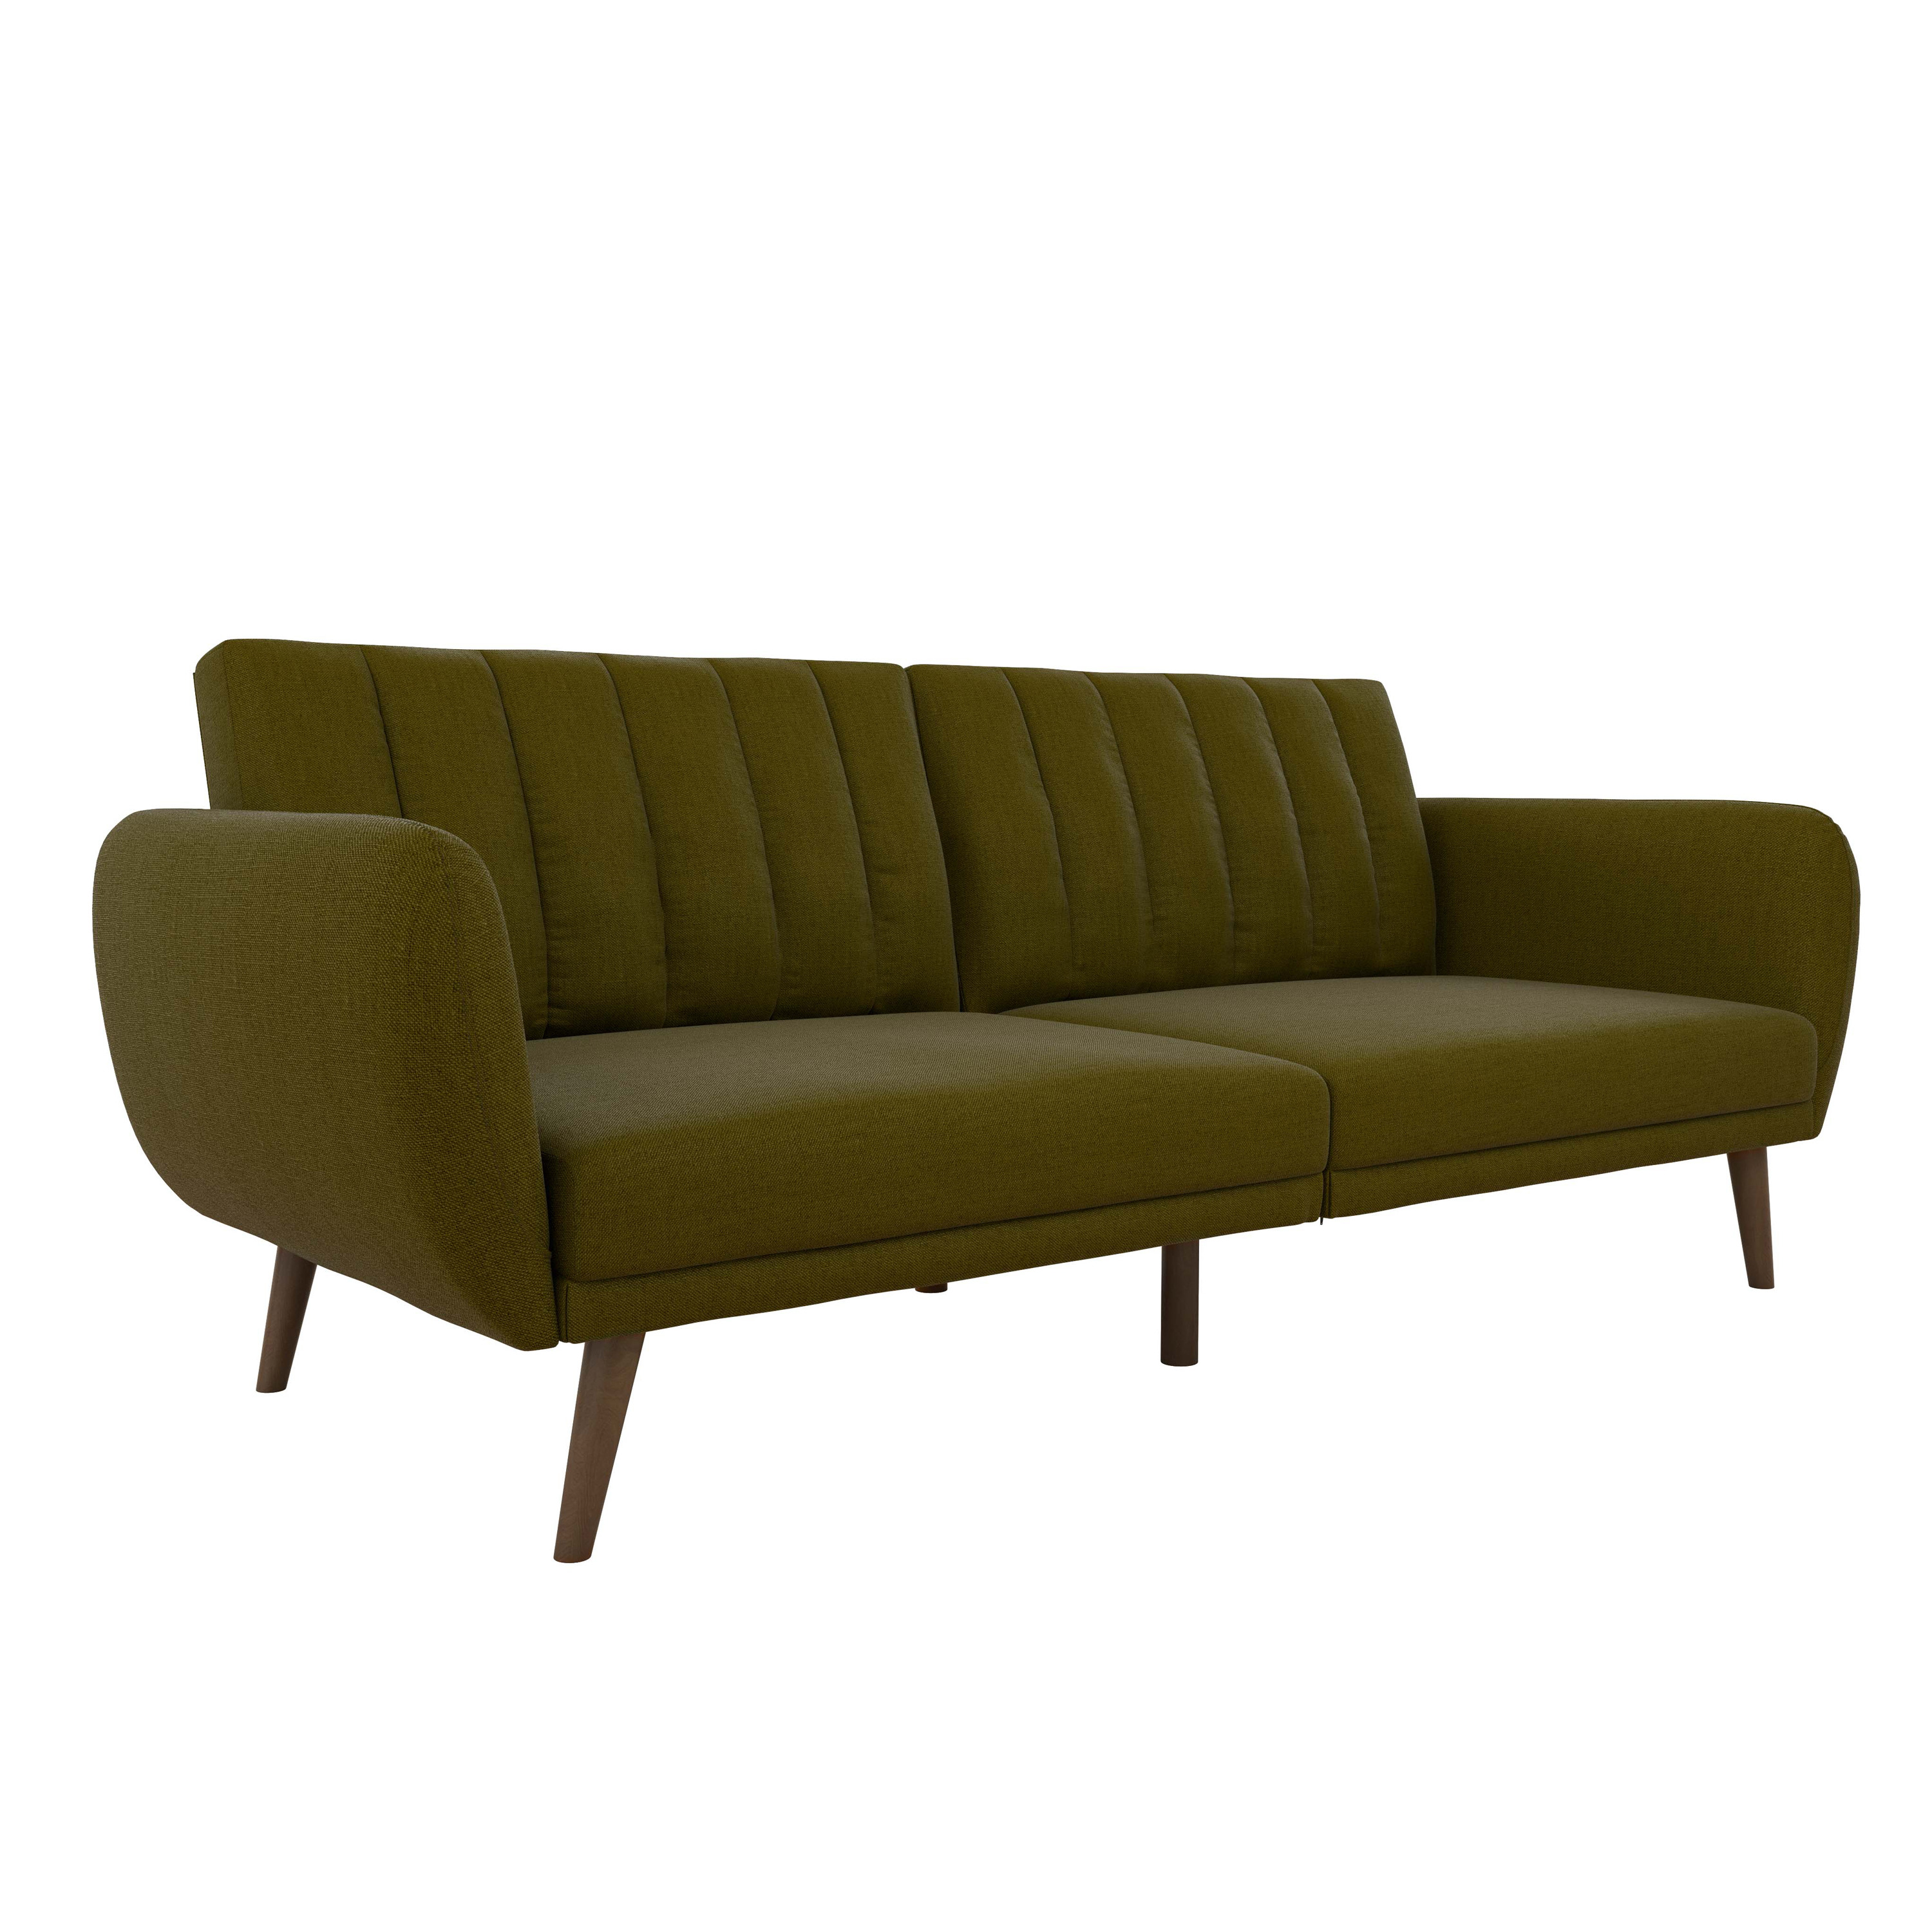 Dorel Brittany Two Seater Sofa Bed Green